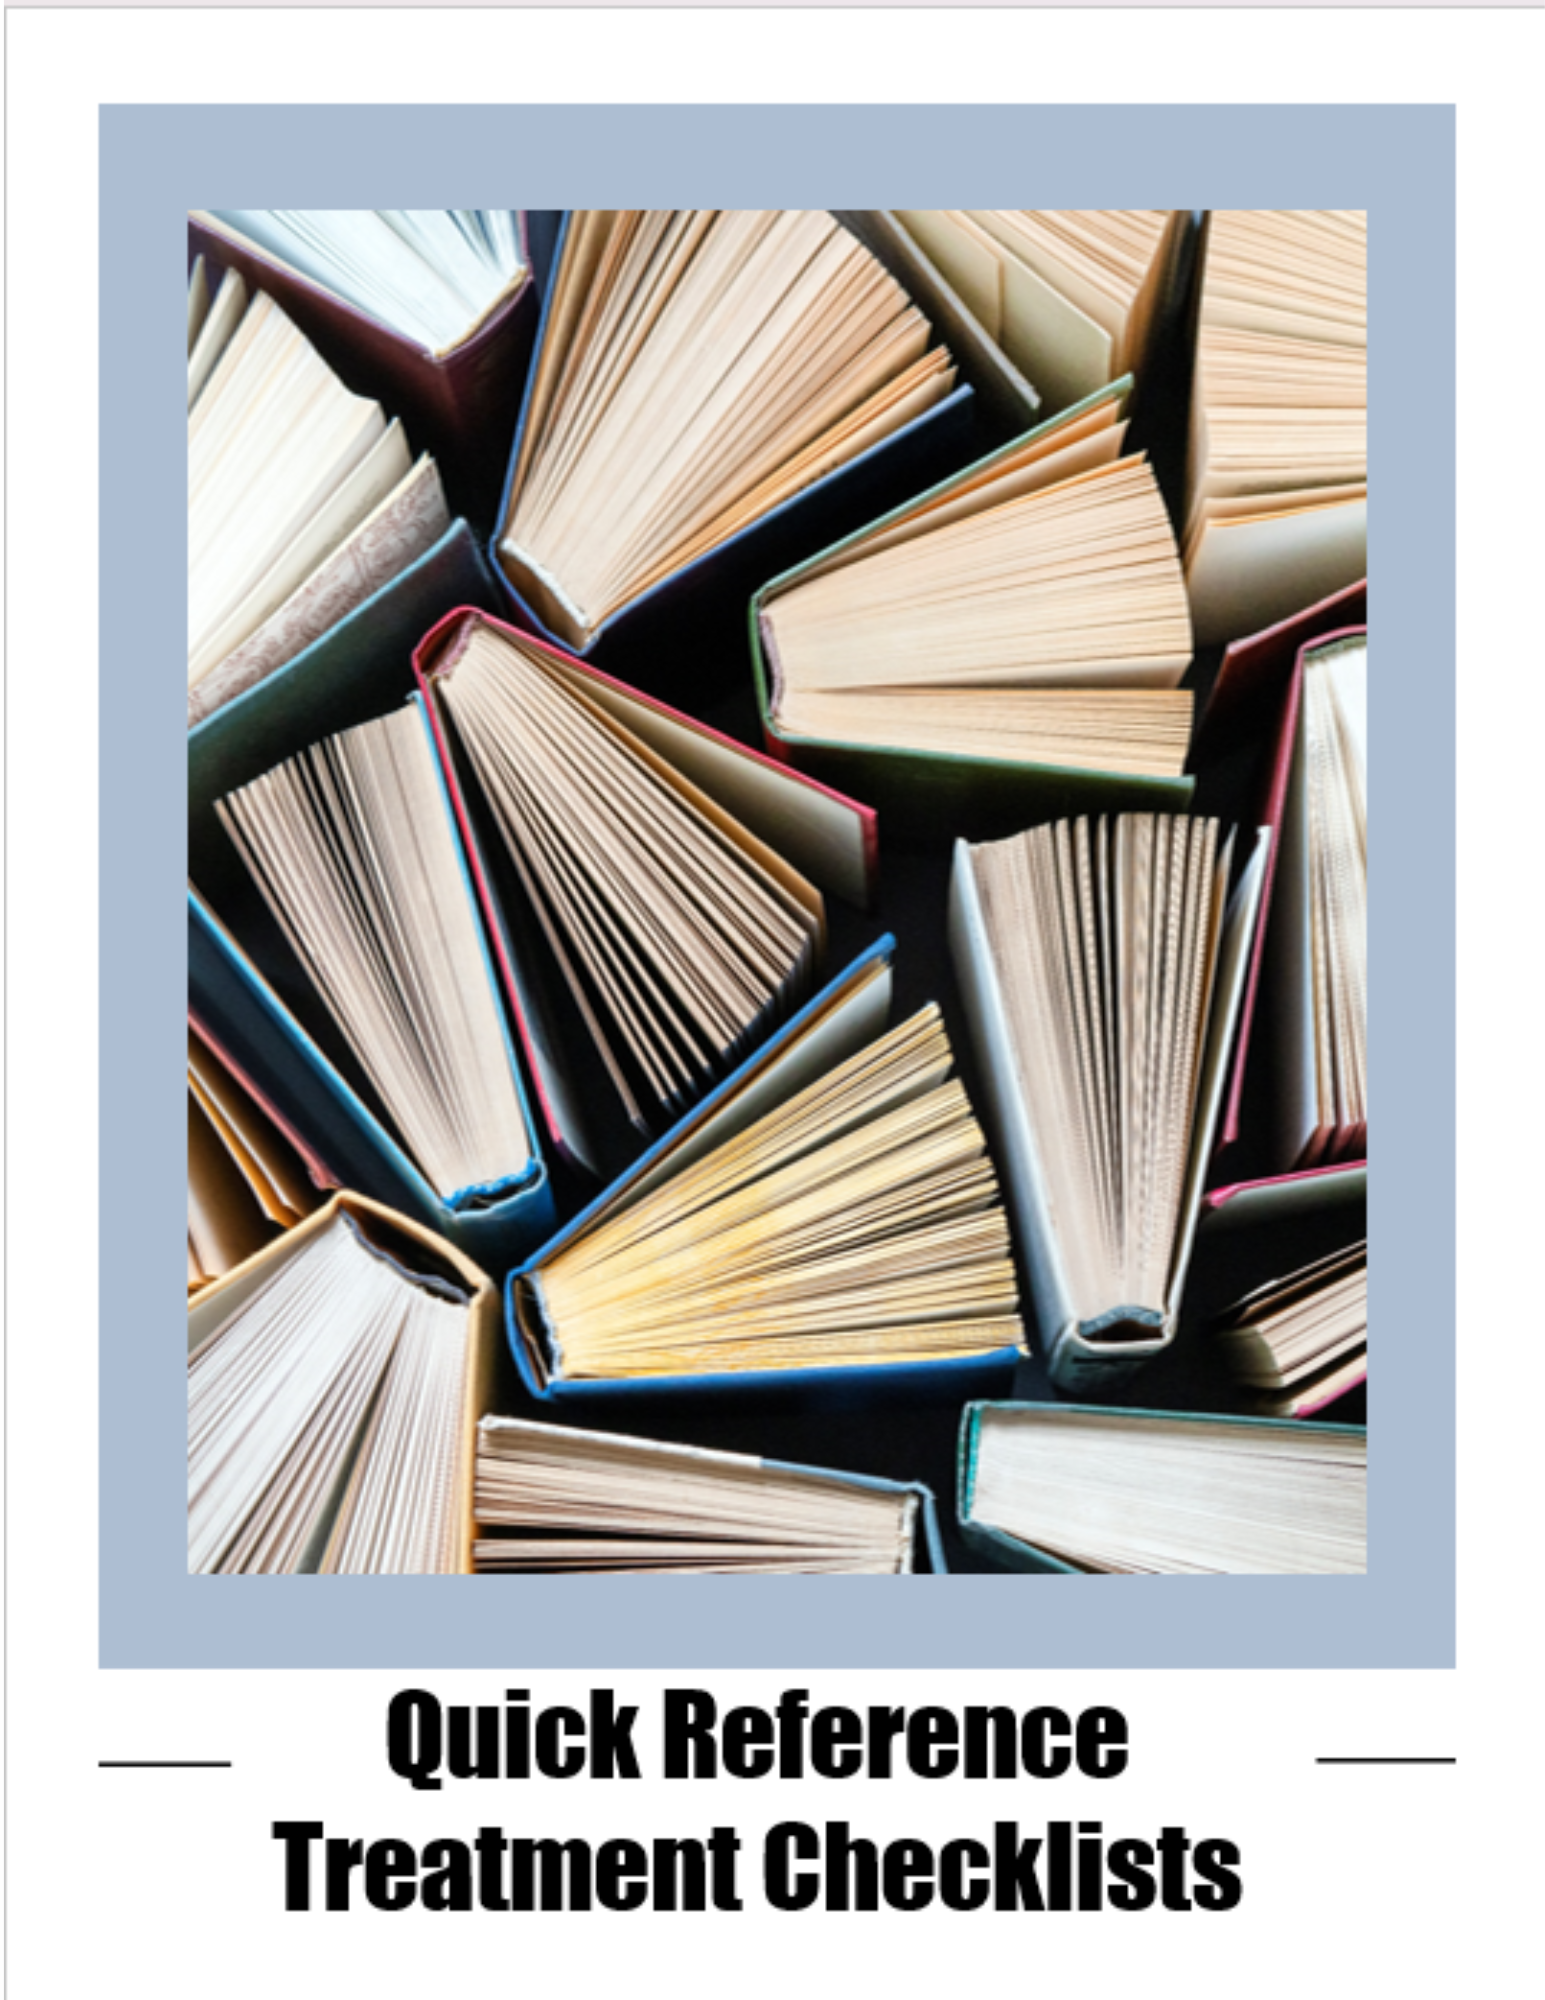 Quick Reference Treatment Checklists